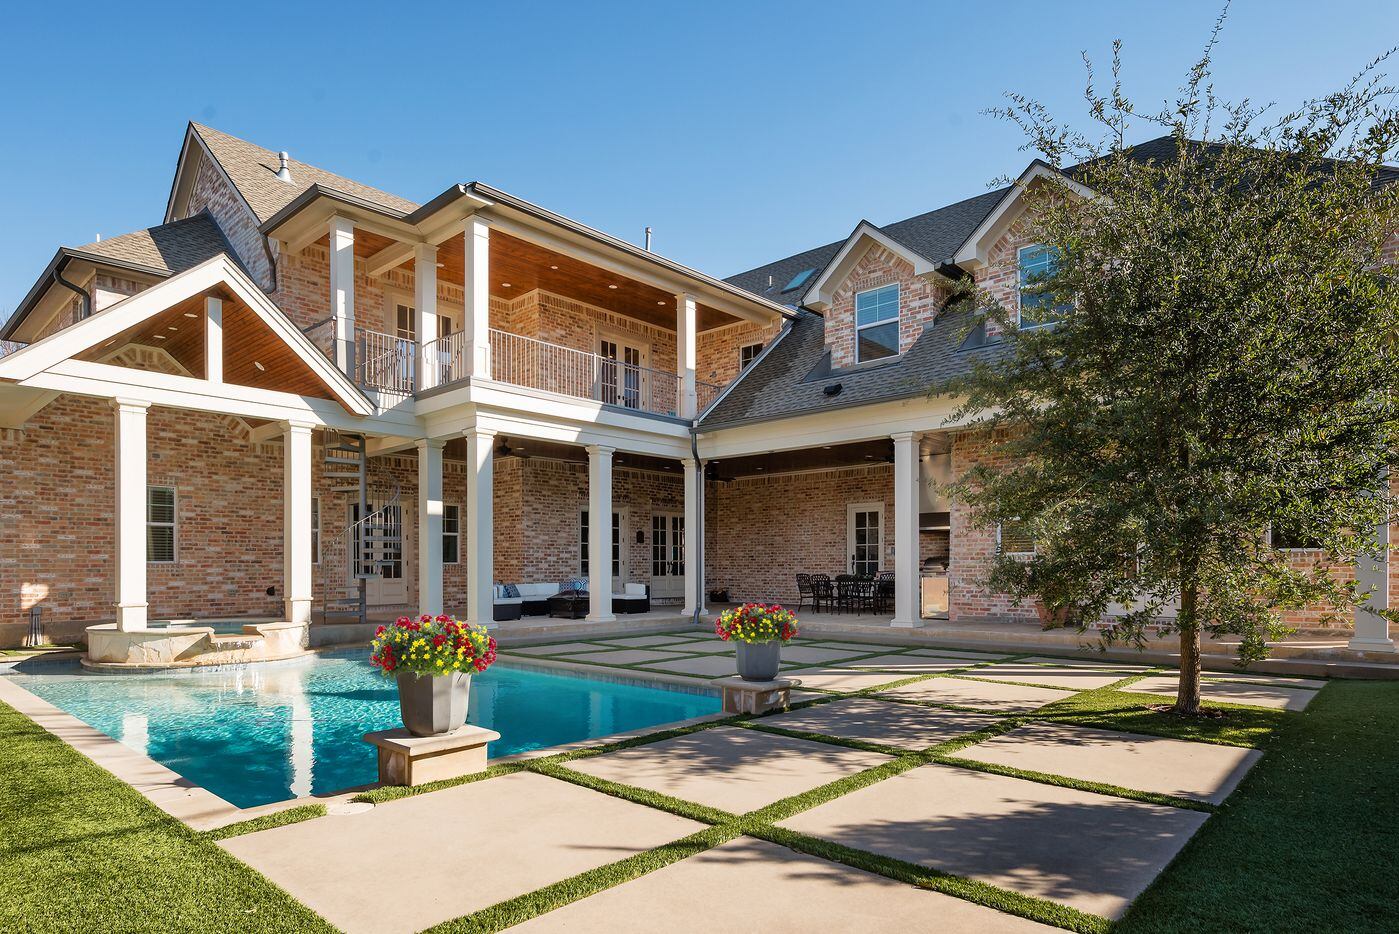 Take a look at the home at 10405 Somerton Drive in Dallas.